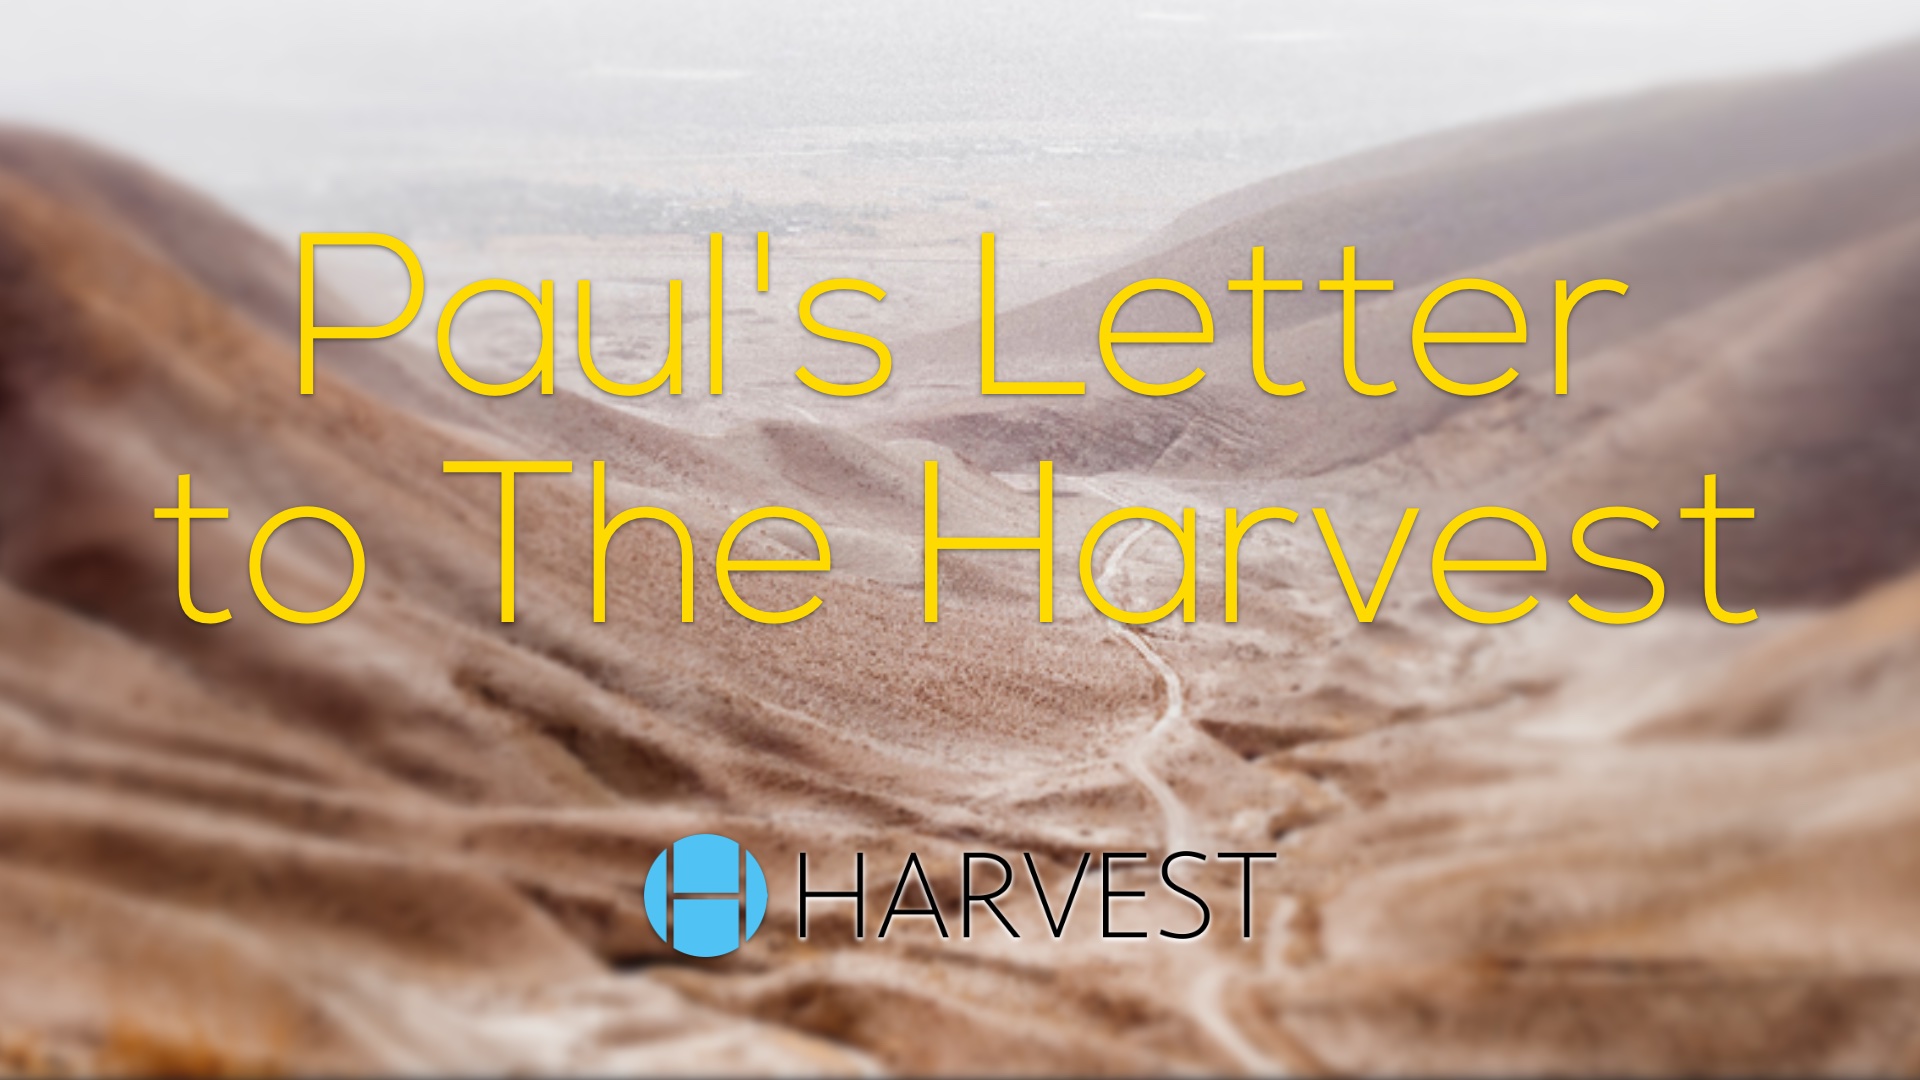 The Apostle Paul’s Instructions to Harvest